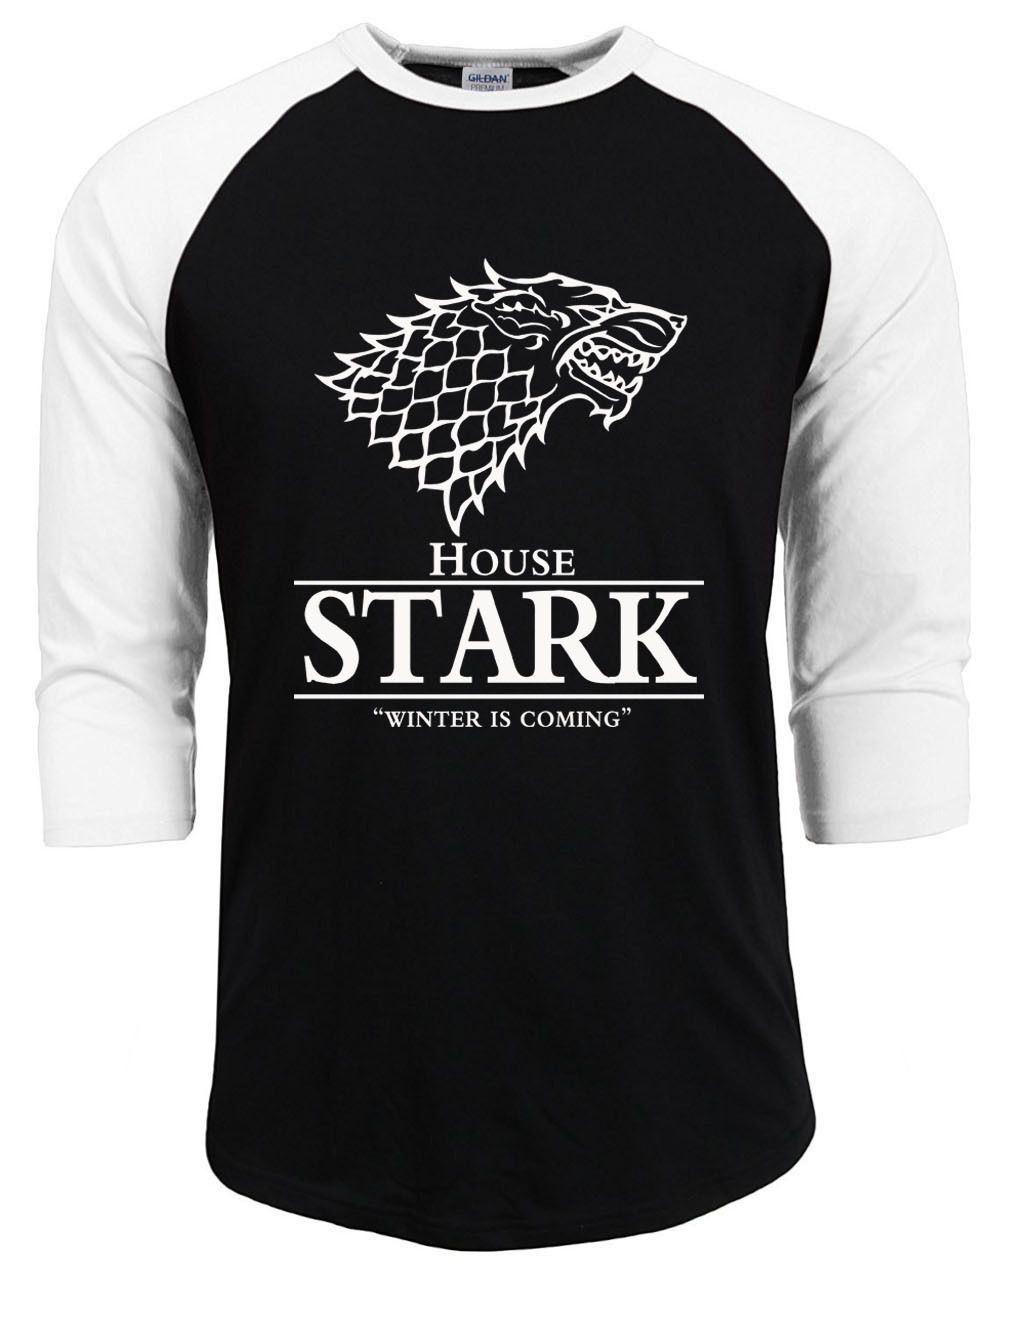 Bodybuilding Game Of Thrones T Shirts For Men Shirt An Ice Song